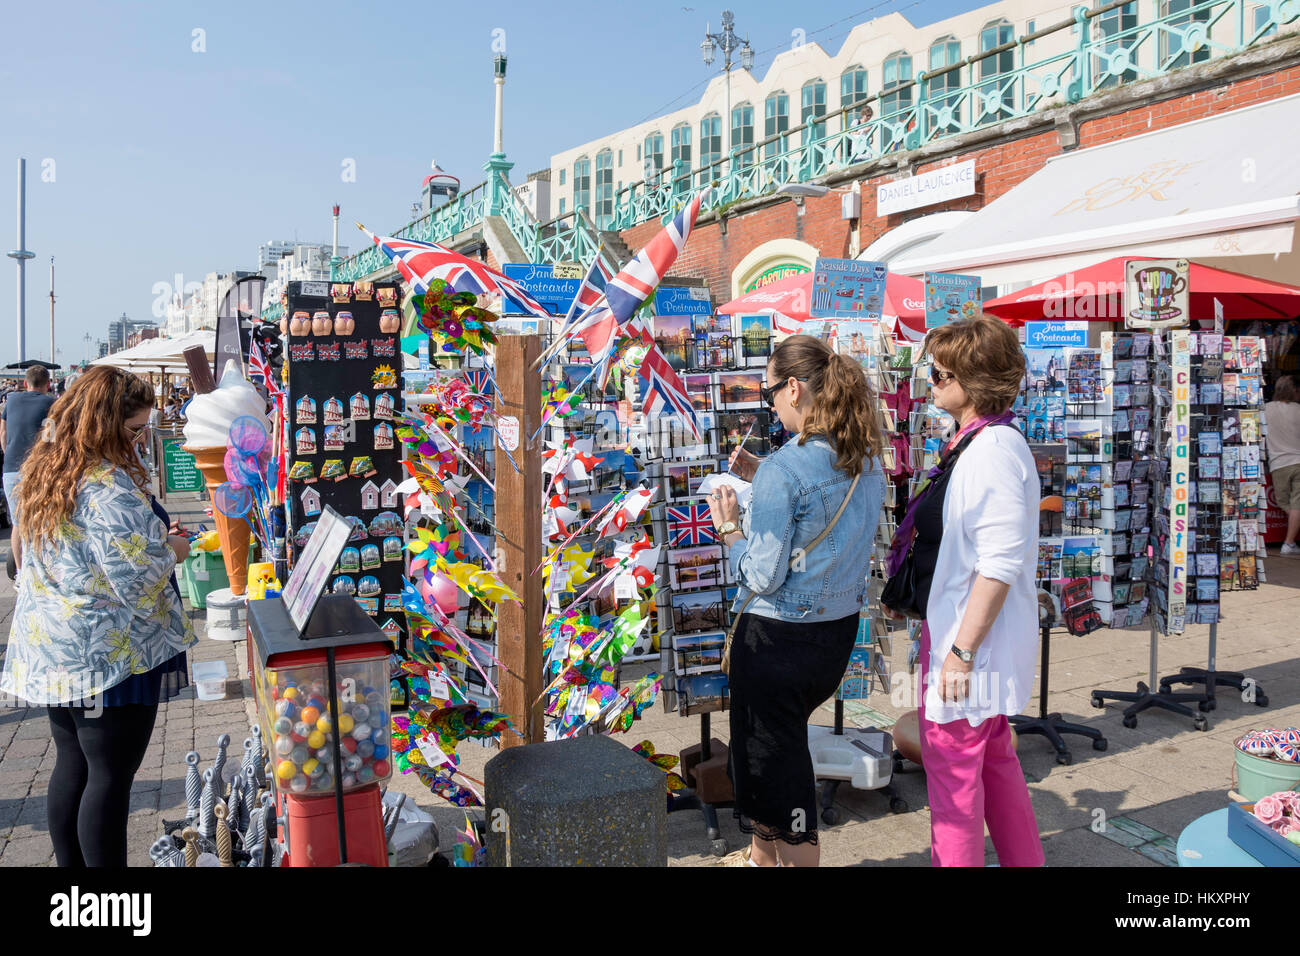 Postcard and souvenir stall, Kings Road Arches, Brighton, East Sussex, England, United Kingdom Stock Photo